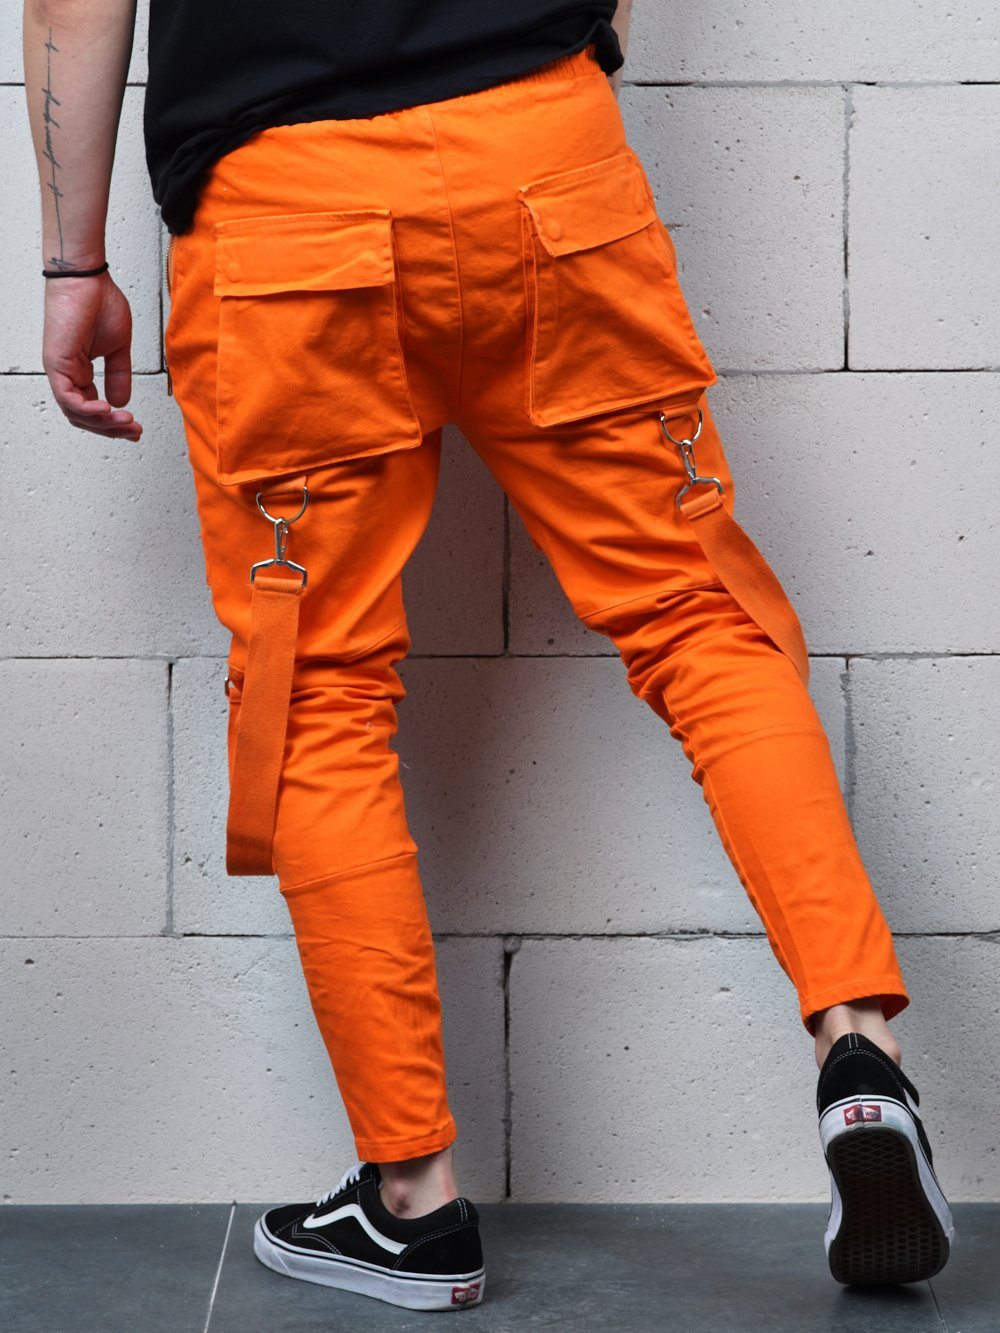 A man wearing ORANGE BRONX cargo pants is leaning against a brick wall.